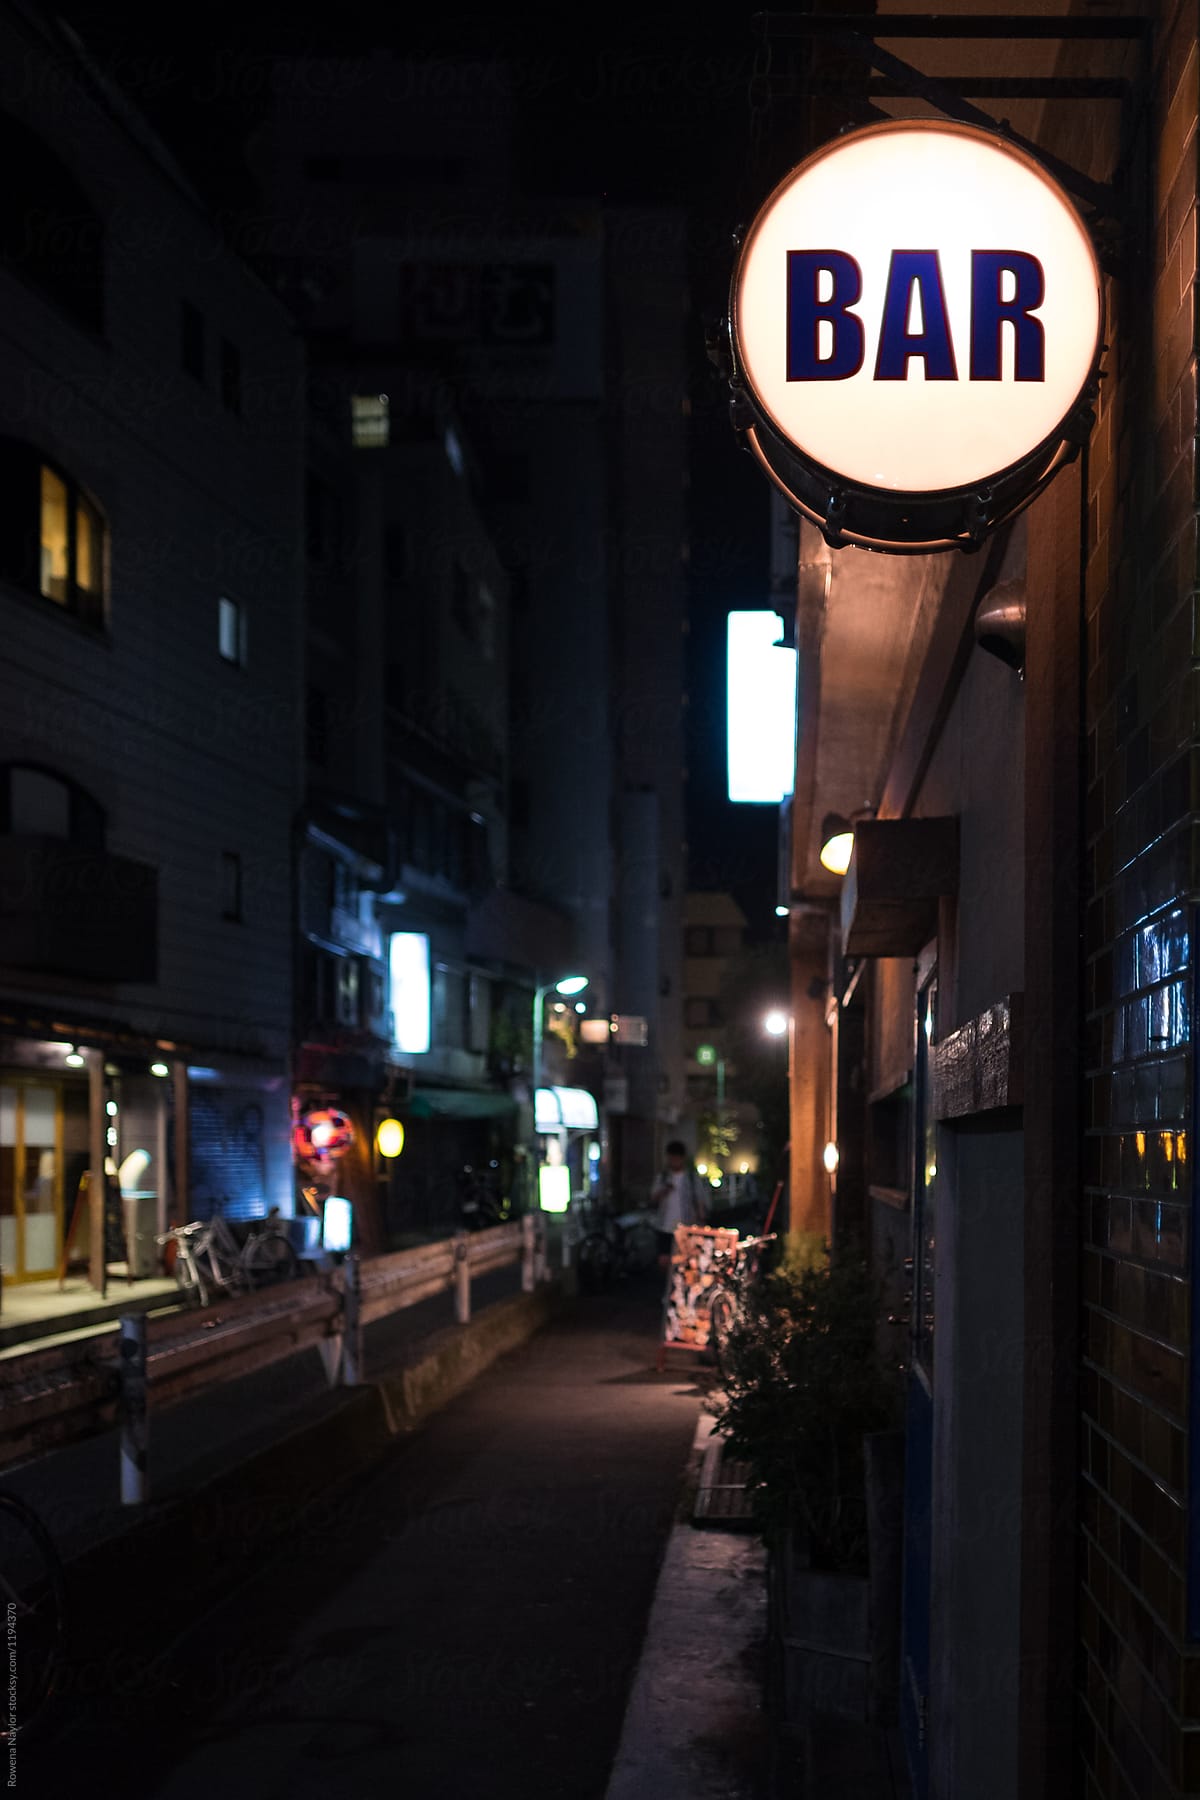 Neon Bar sign in street at night